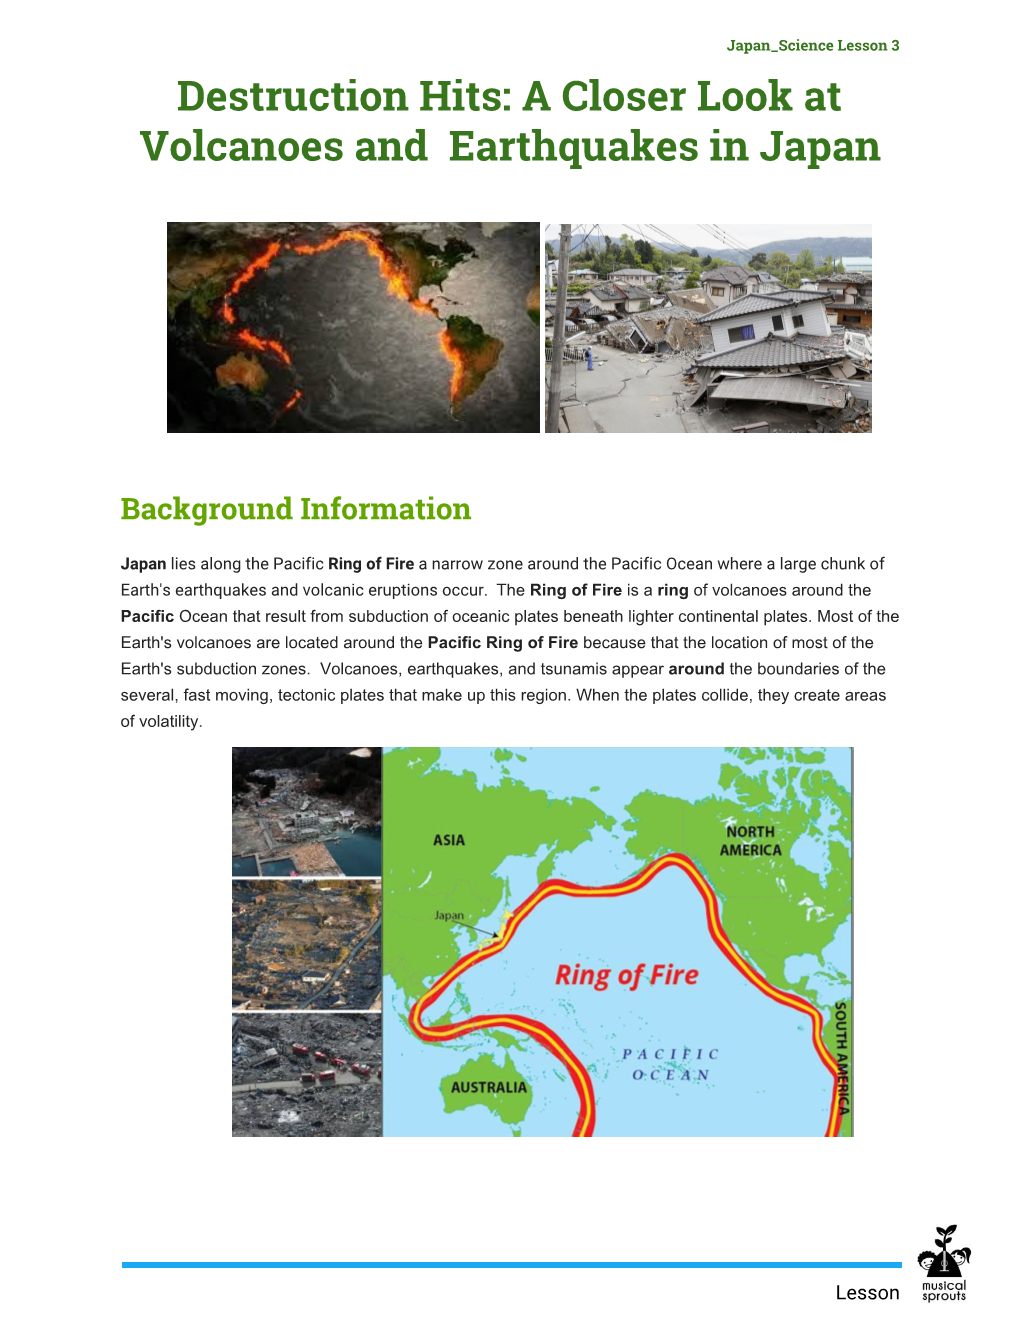 Destruction Hits: a Closer Look at Volcanoes and Earthquakes in Japan